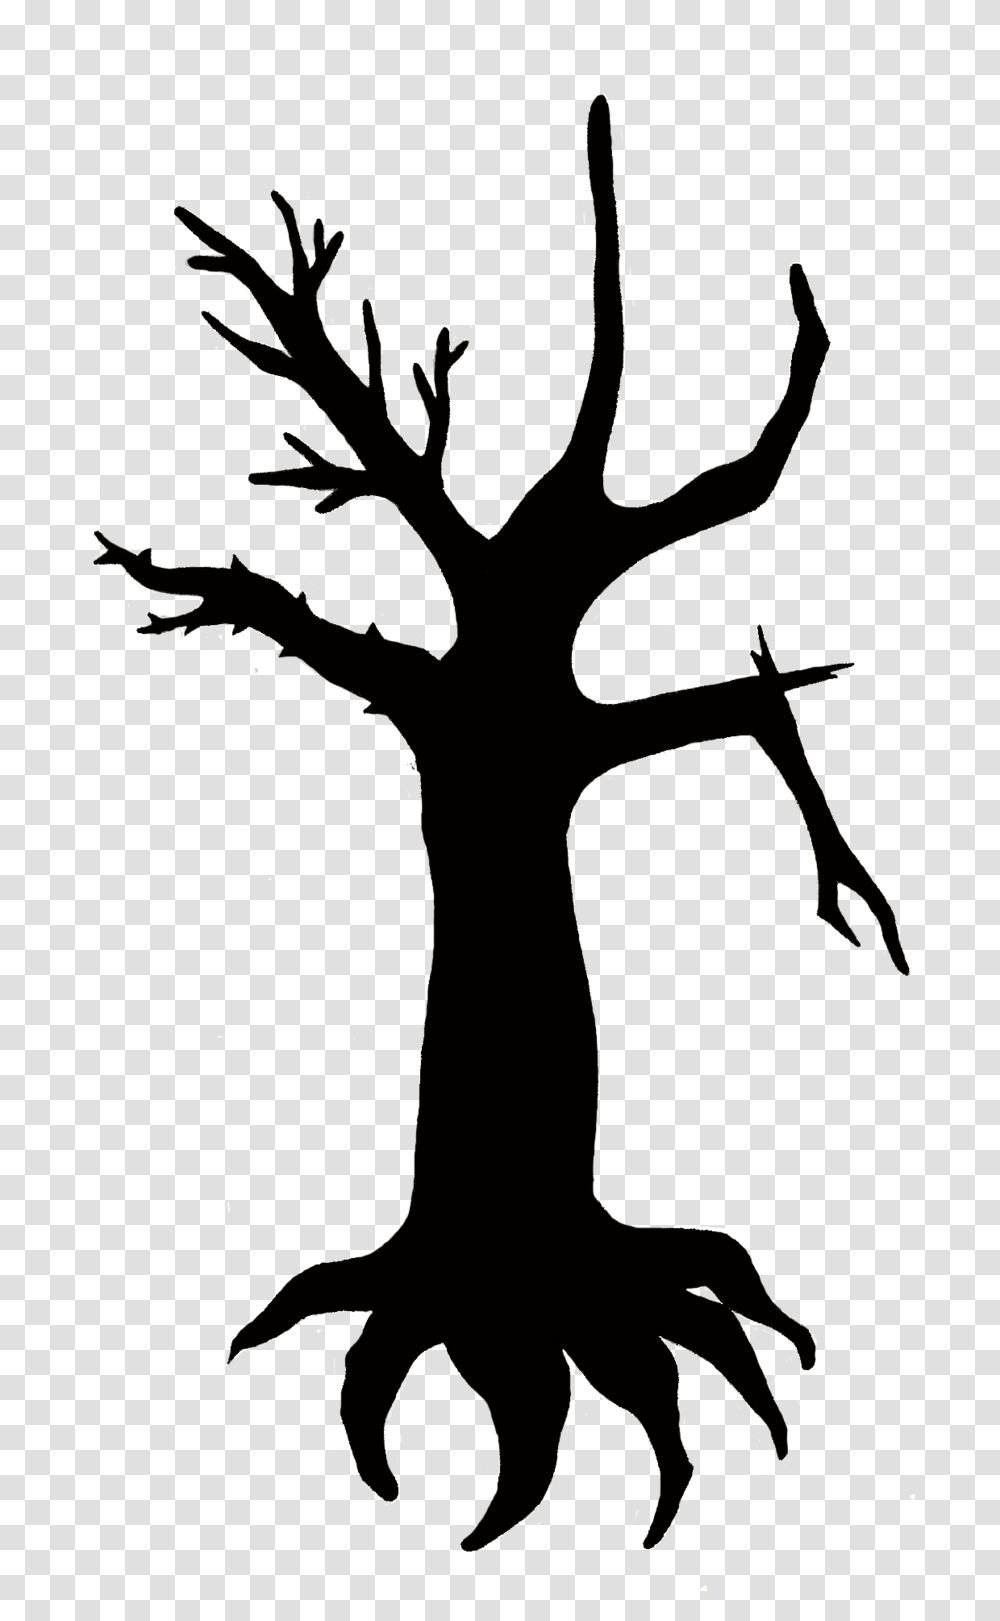 Redwood Tree Image, Plant, Silhouette, Stencil, Tree Trunk Transparent Png